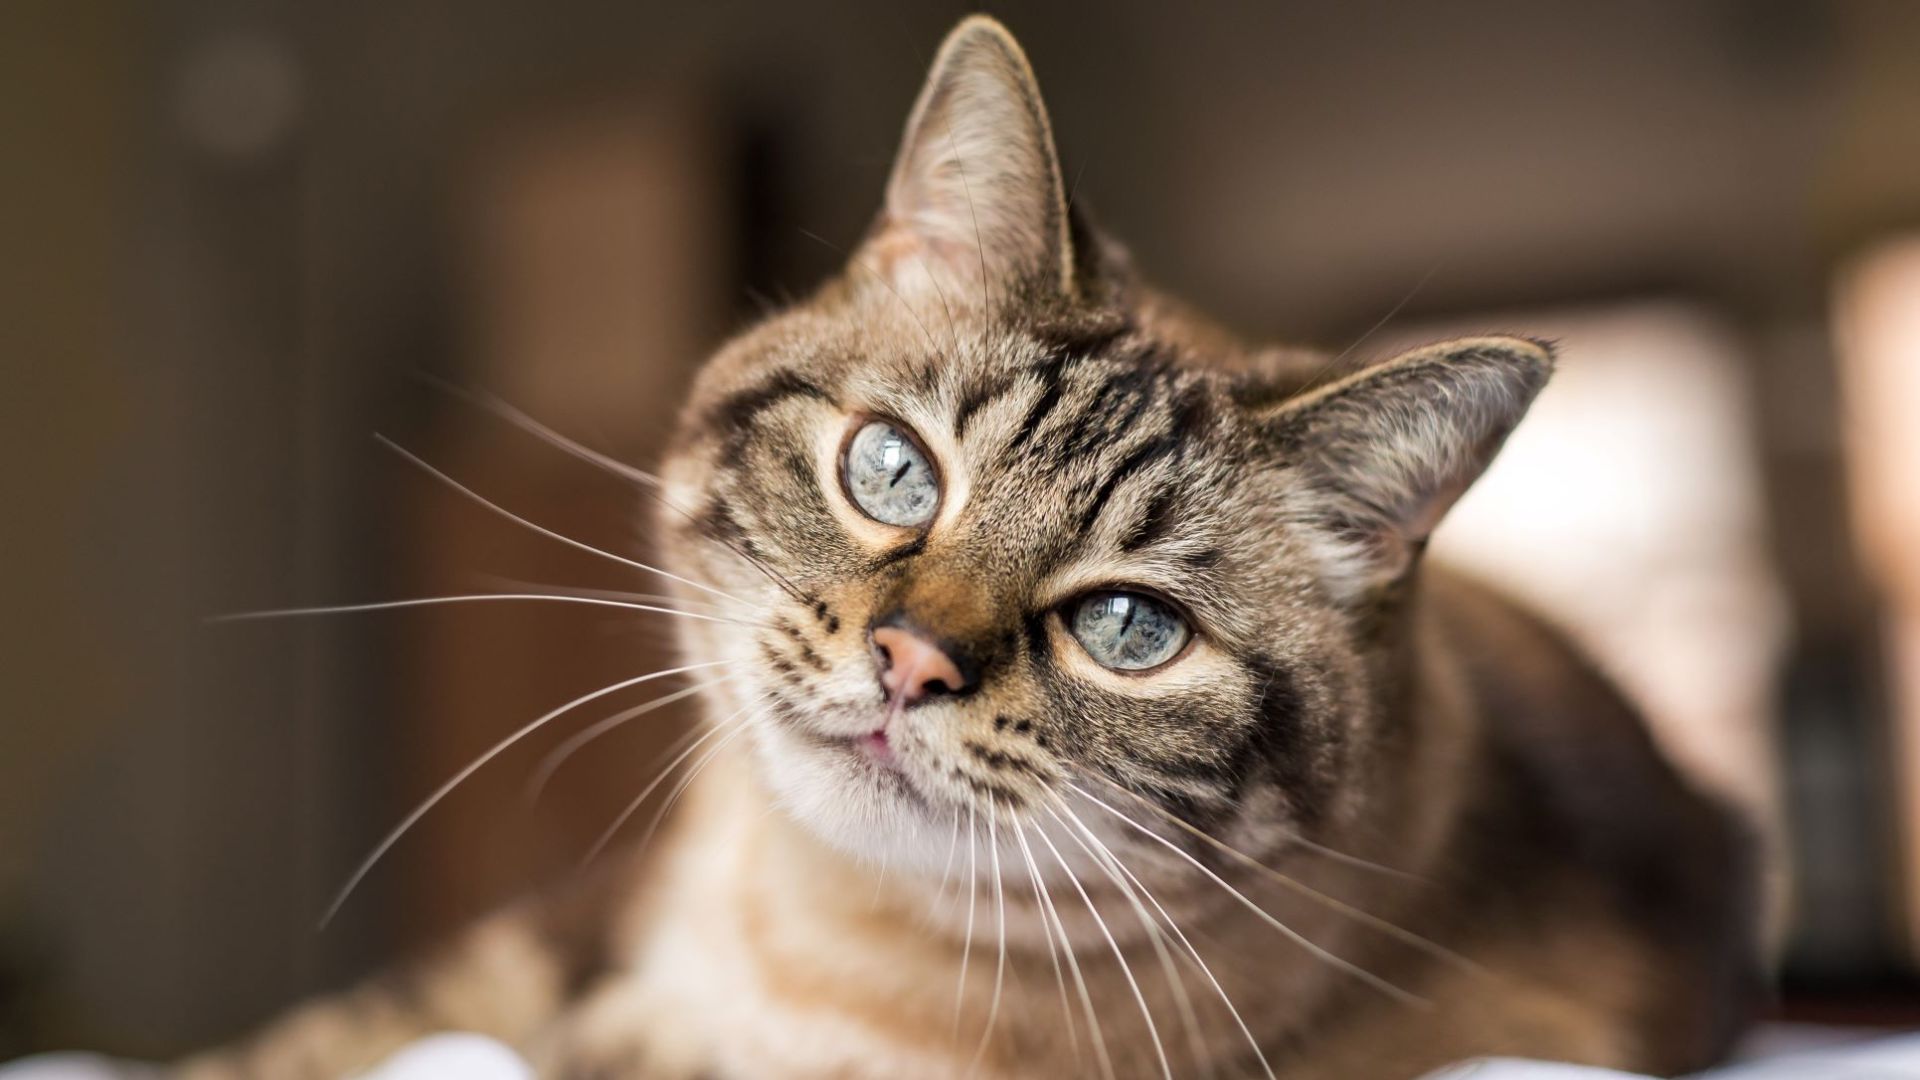 <p>                     Even your cat’s face can hold an expression of happiness! You may notice your chilled-out cat’s whiskers are relaxed and not pulled back in a guarded manner, while their eyes are partially closed or blinking softly to let you know they love you.                    </p>